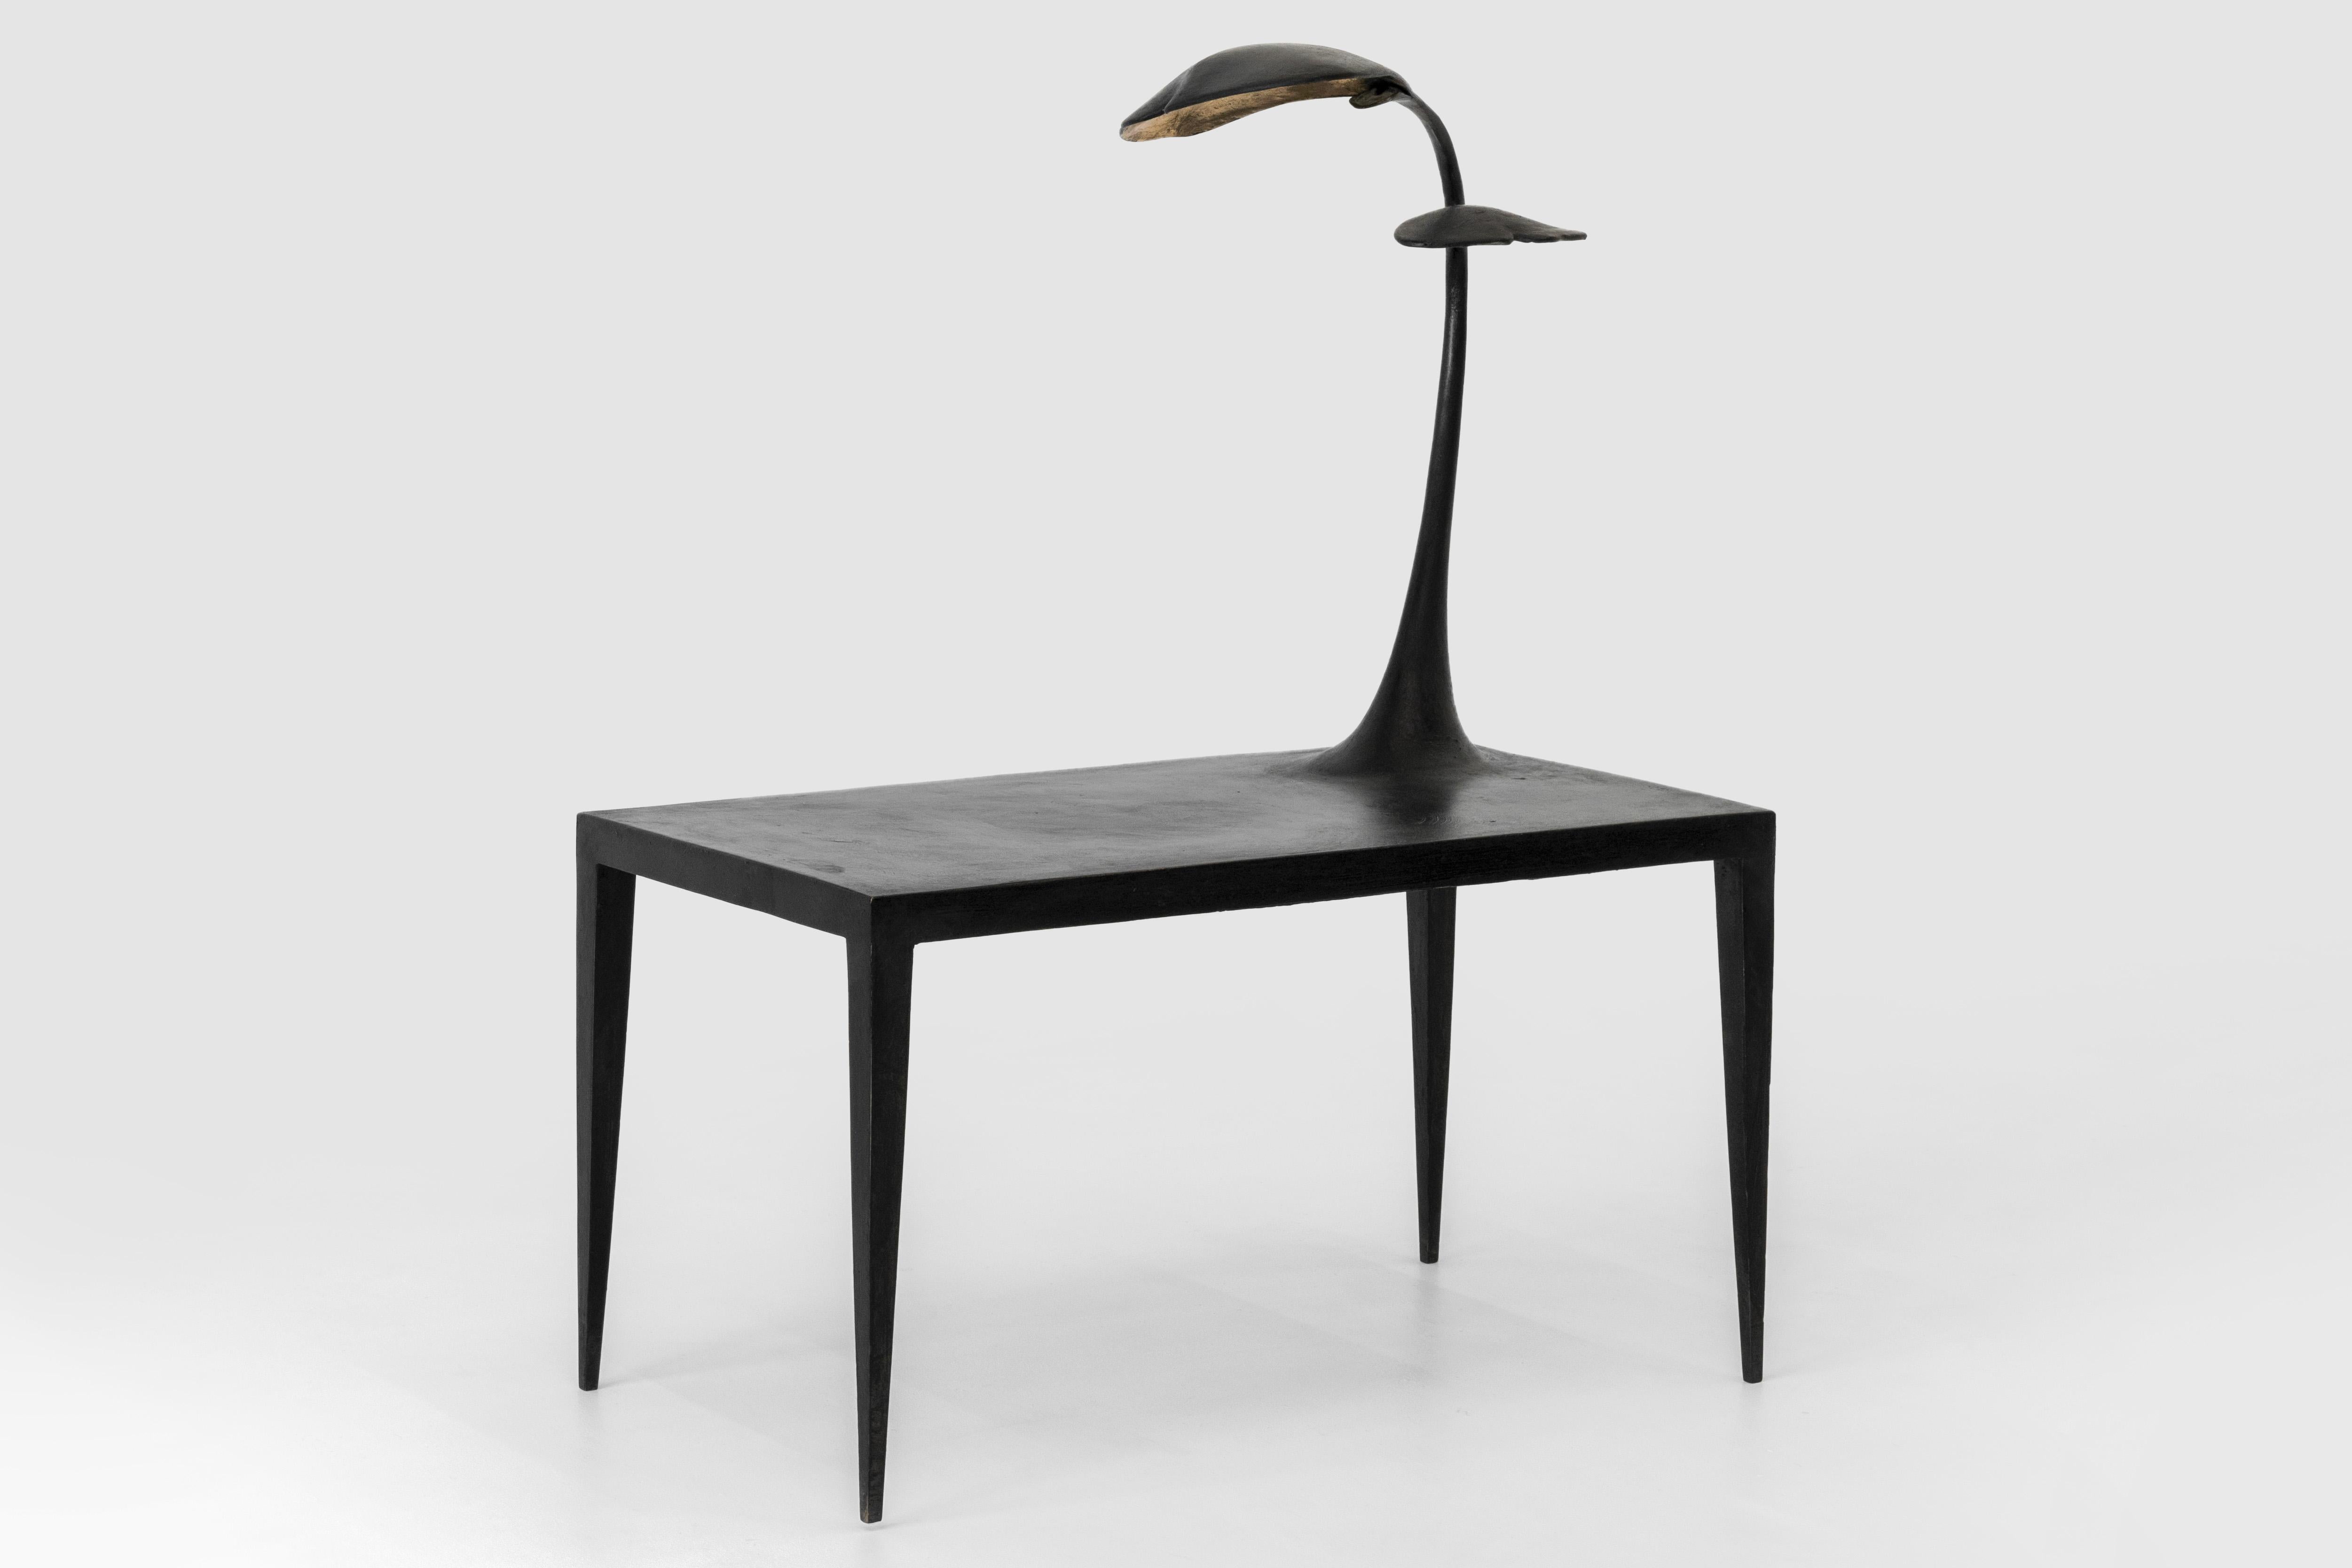 This side table is a tribute to Swedish botanist Carl Linnaeus, whose work contributed to our understanding of Ginkgo tree. The shape of the light fitting on the side table is an abstraction of the Ginkgo foliage, a symbol for health and a life of